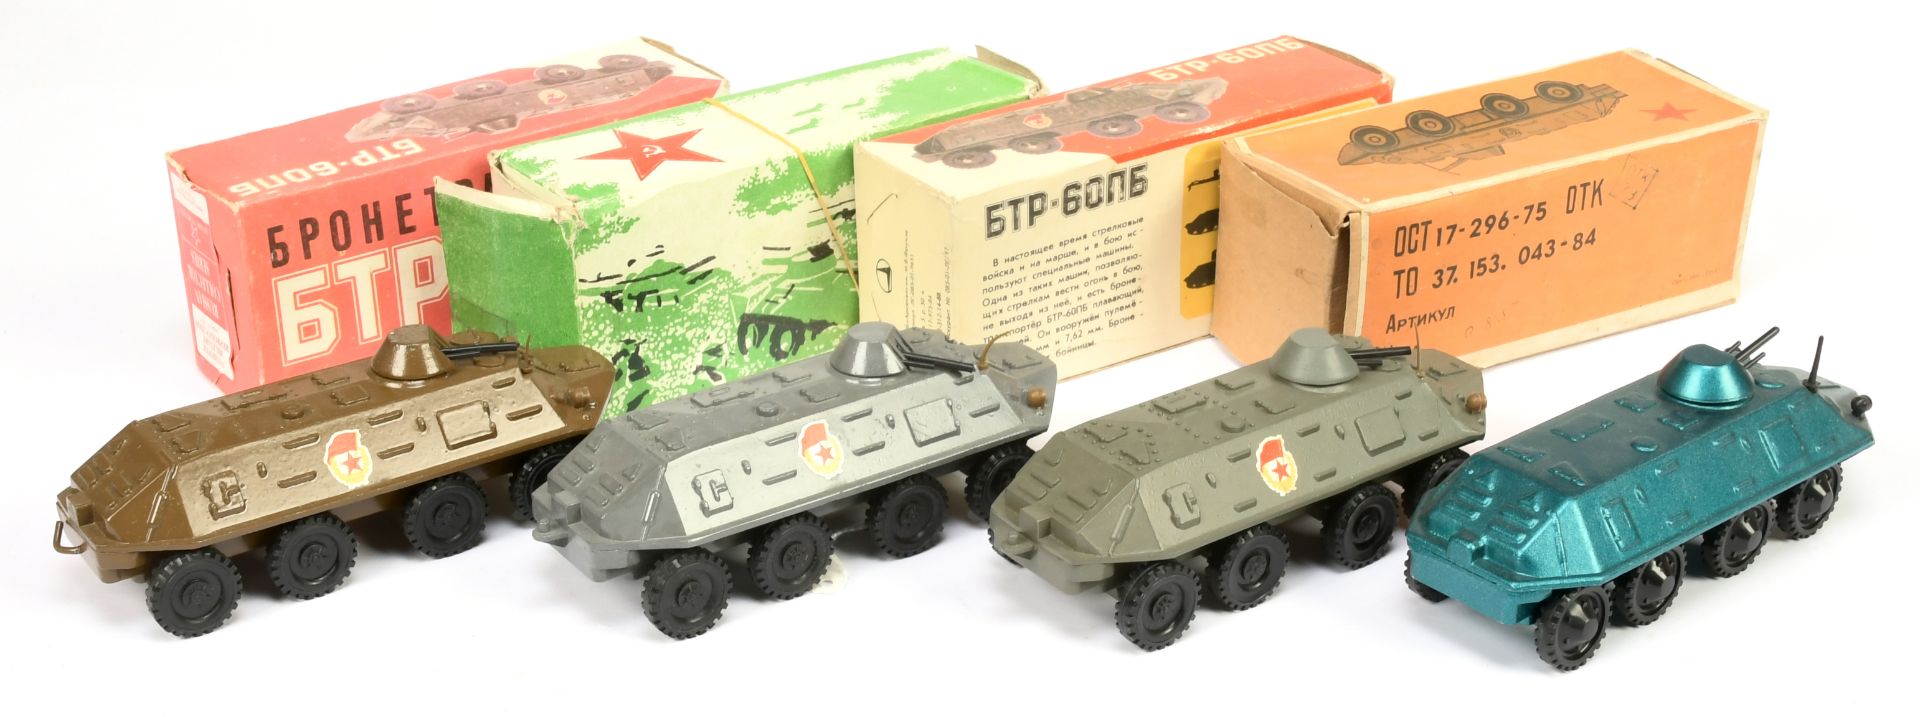 Russain made group of 4 Armoured cars (1/43rd) scale - (1) metallic sea-green, (2) brown - Image 2 of 2